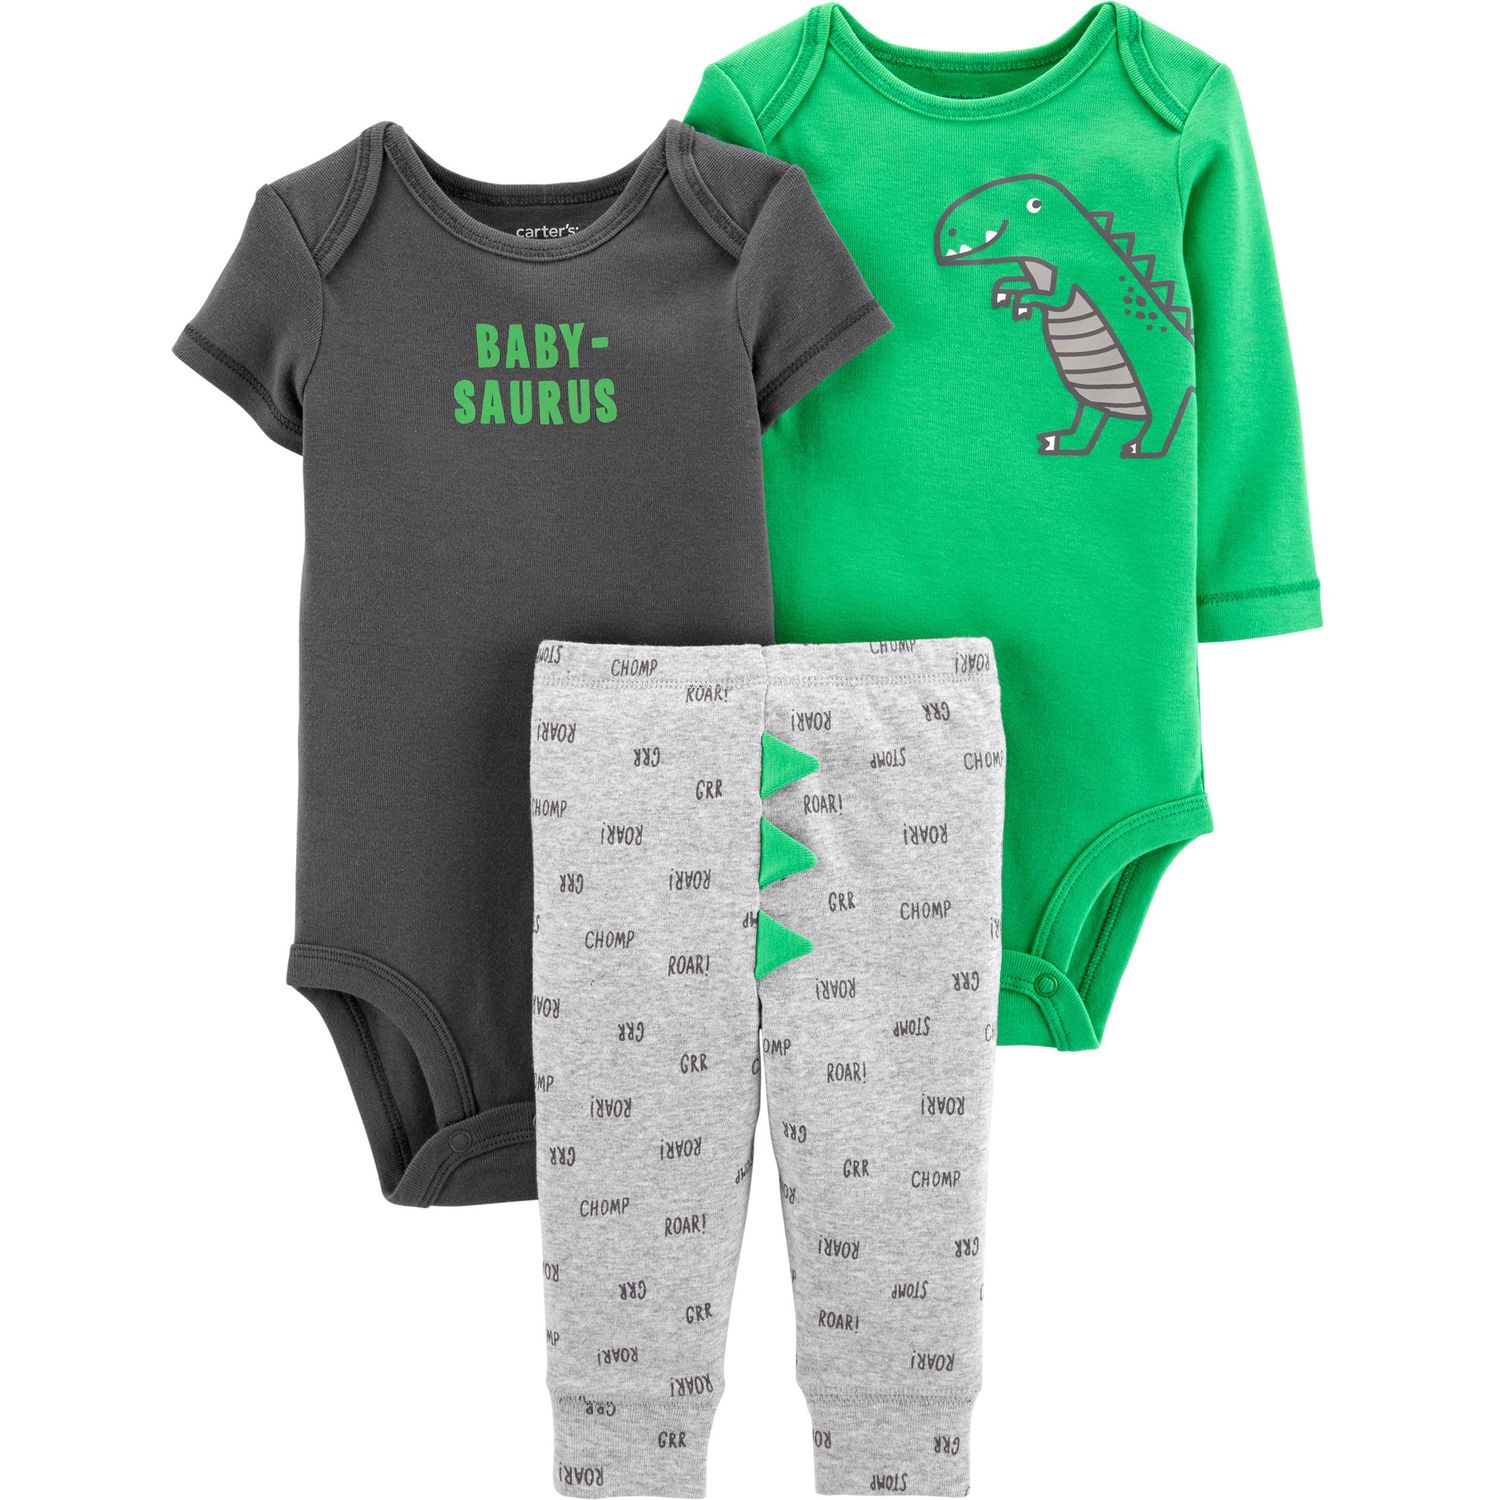 newborn baby boy outfit sets